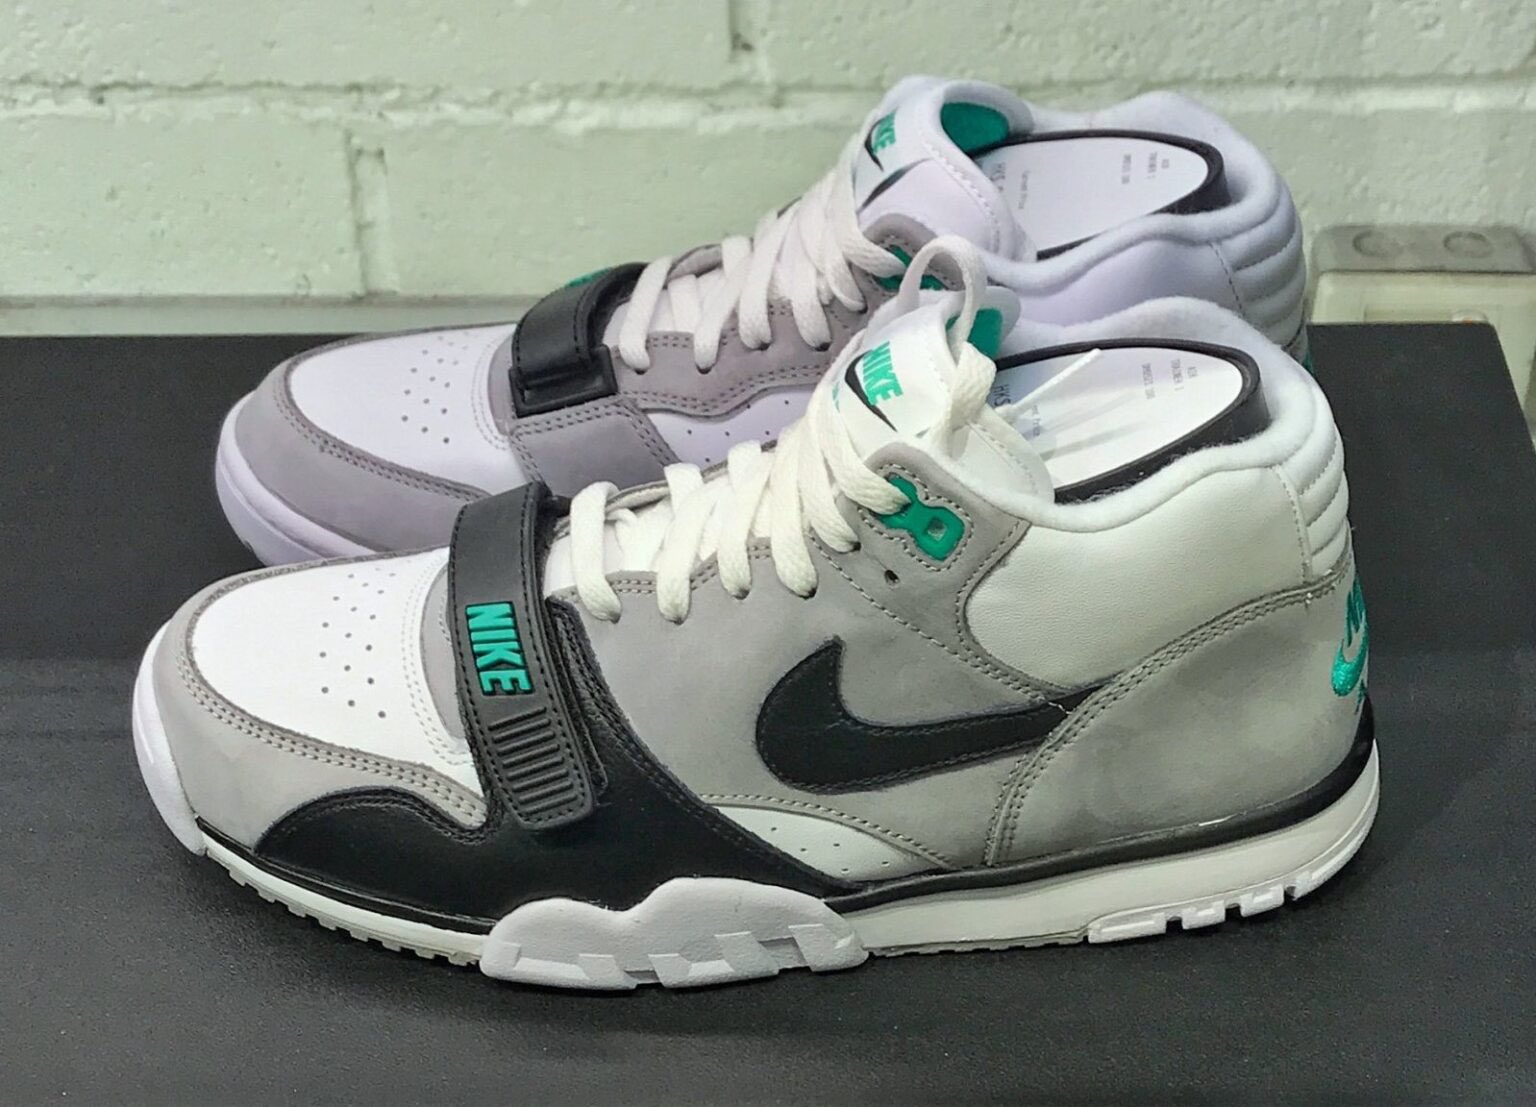 Sneaker Bar Detroit Twitter: "Nike Air Trainer 1 Mid “Chlorophyll” Returns for 35th Anniversary https://t.co/0OA7W9dYtb https://t.co/rZuzGmYufv" / Twitter